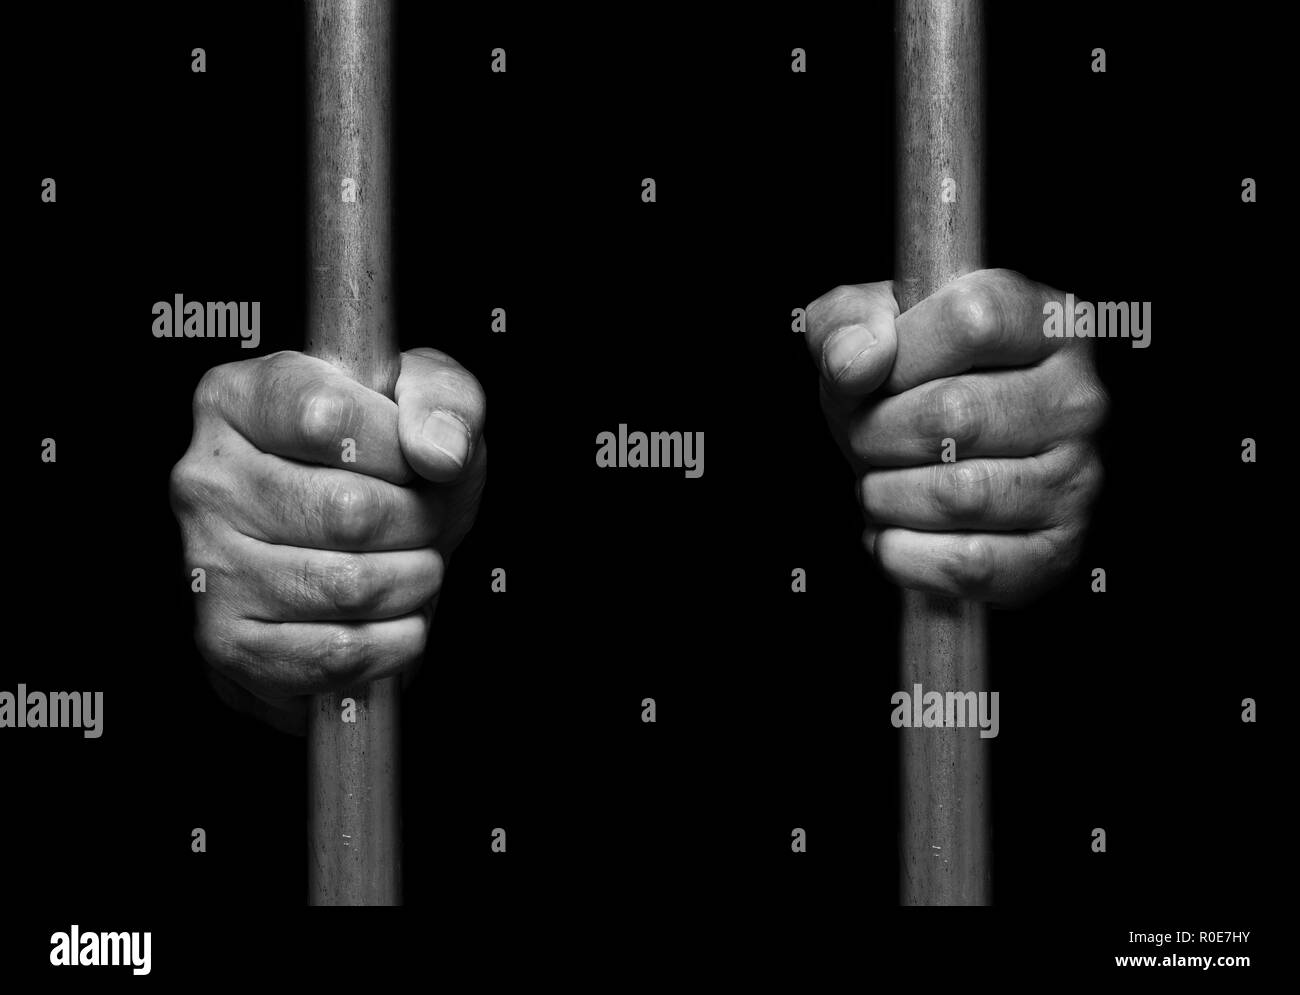 Person's hands holding prison bars. Stock Photo